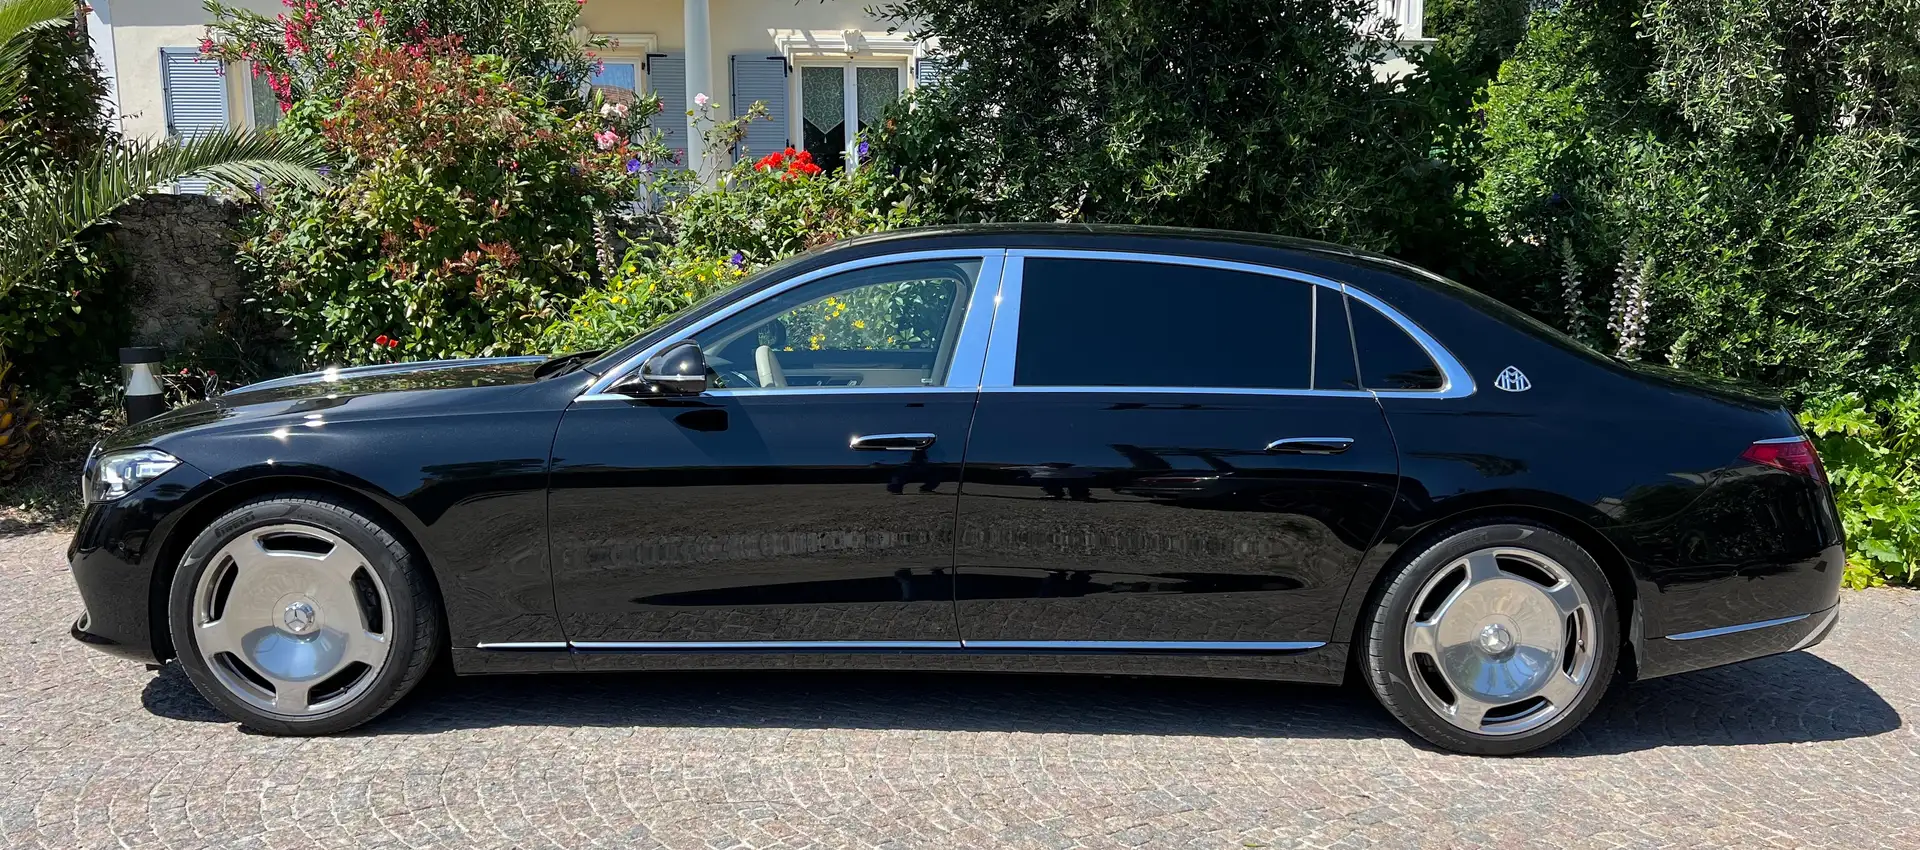 Mercedes-Benz S 580 MAYBACH 4MATIC V8, 4 PLACES (Série 223) Negro - 2